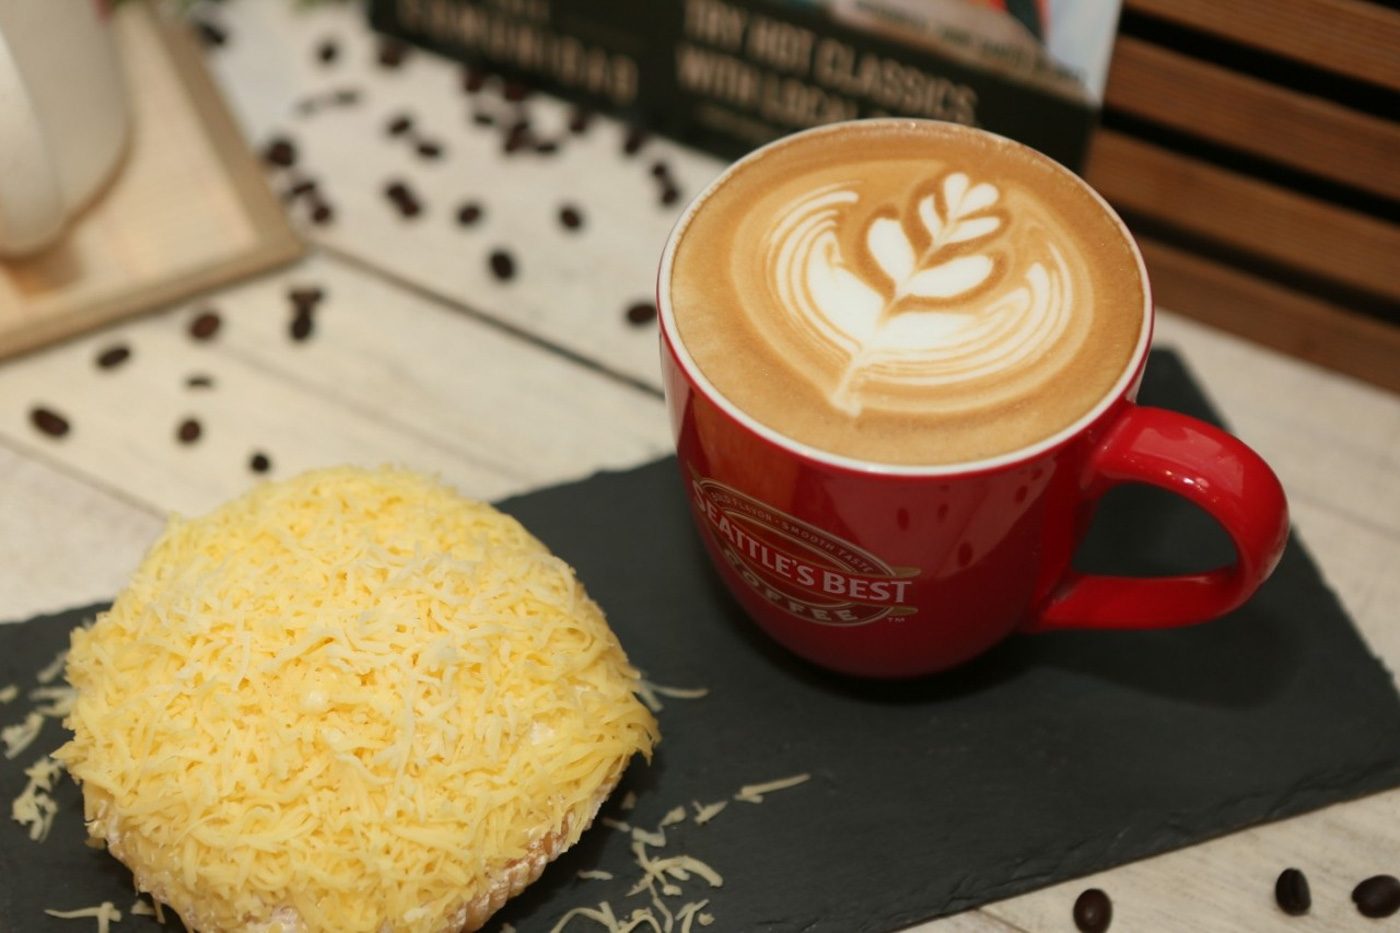 PERFECT PAIR. How can you say no to a creamy latte and ensaymada? 